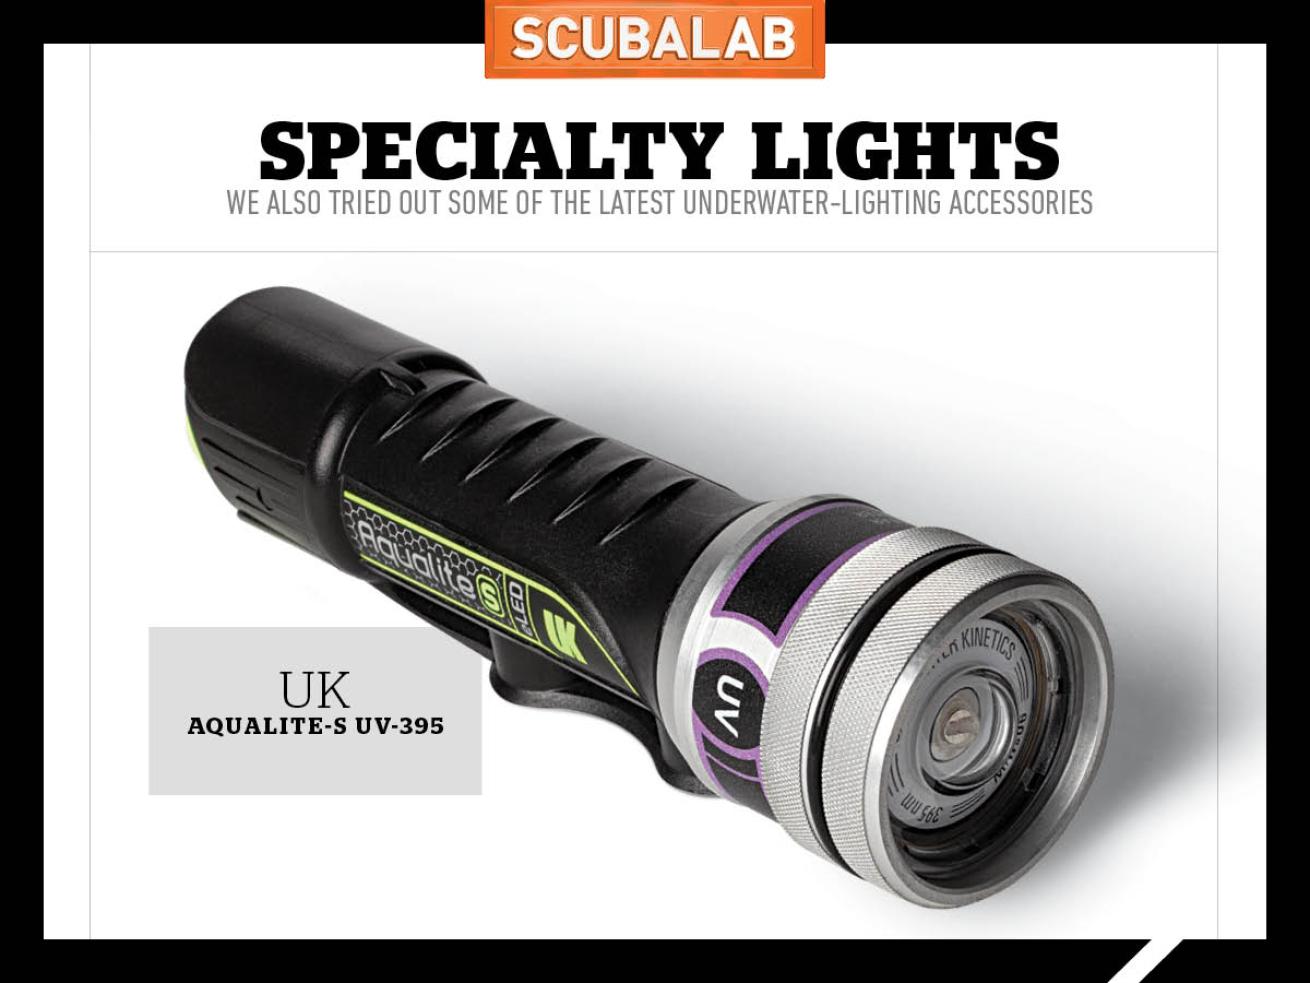 UK Aqualite-S UV-395 Dive Light Reviewed by ScubaLab